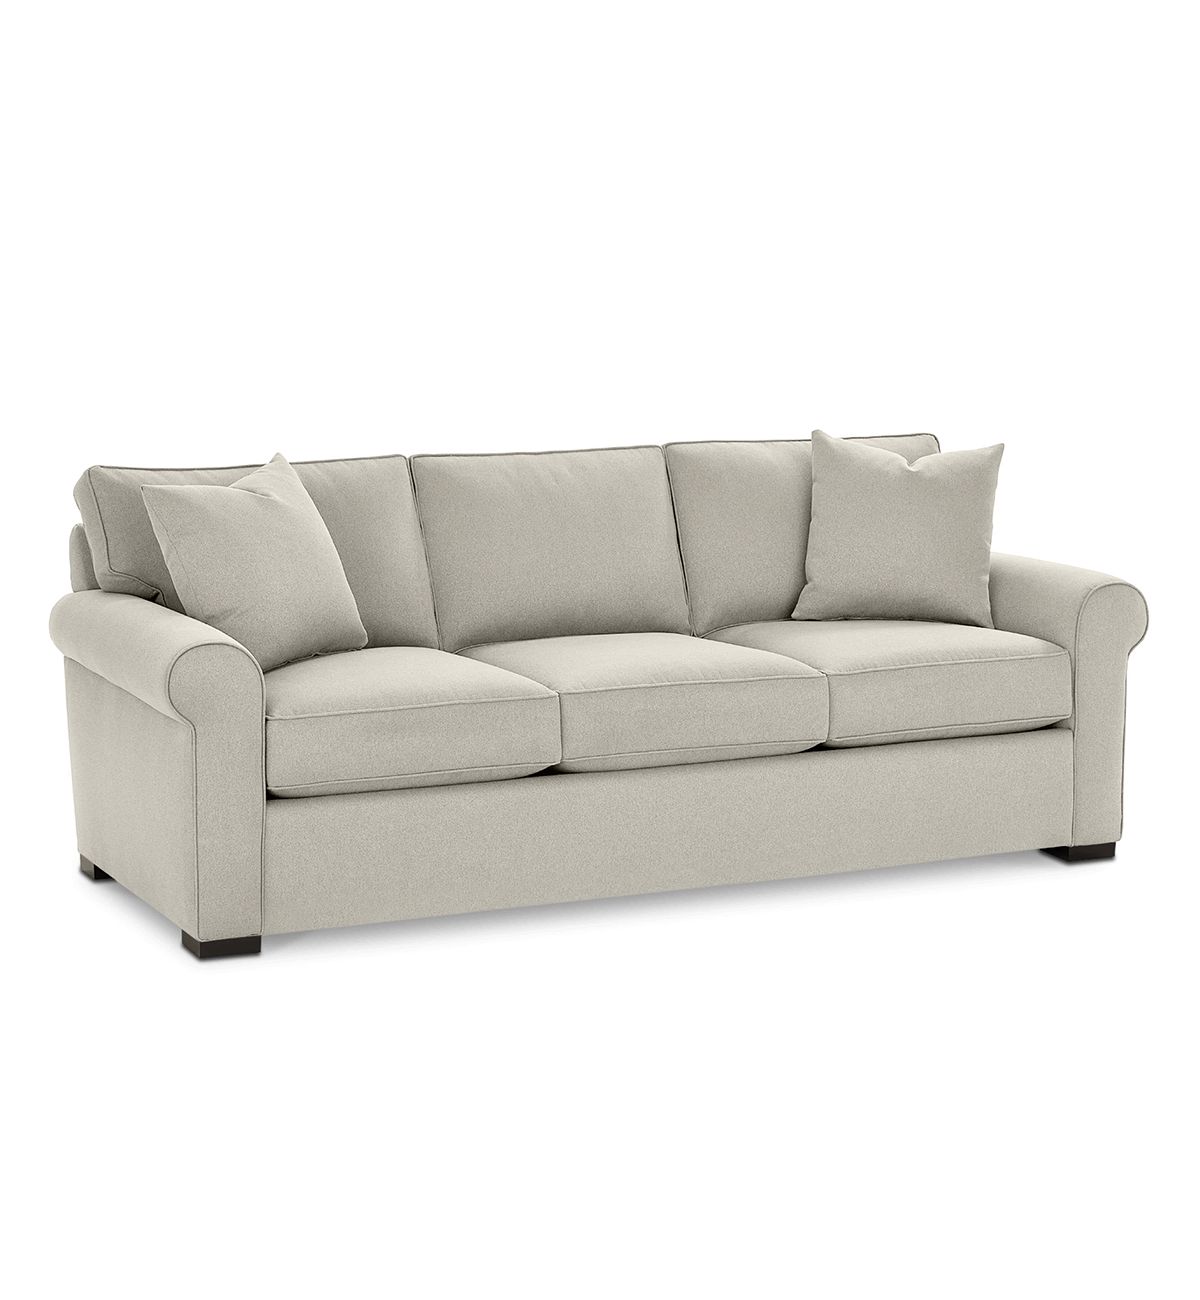 rhyder Sofas & Couches - Macy's